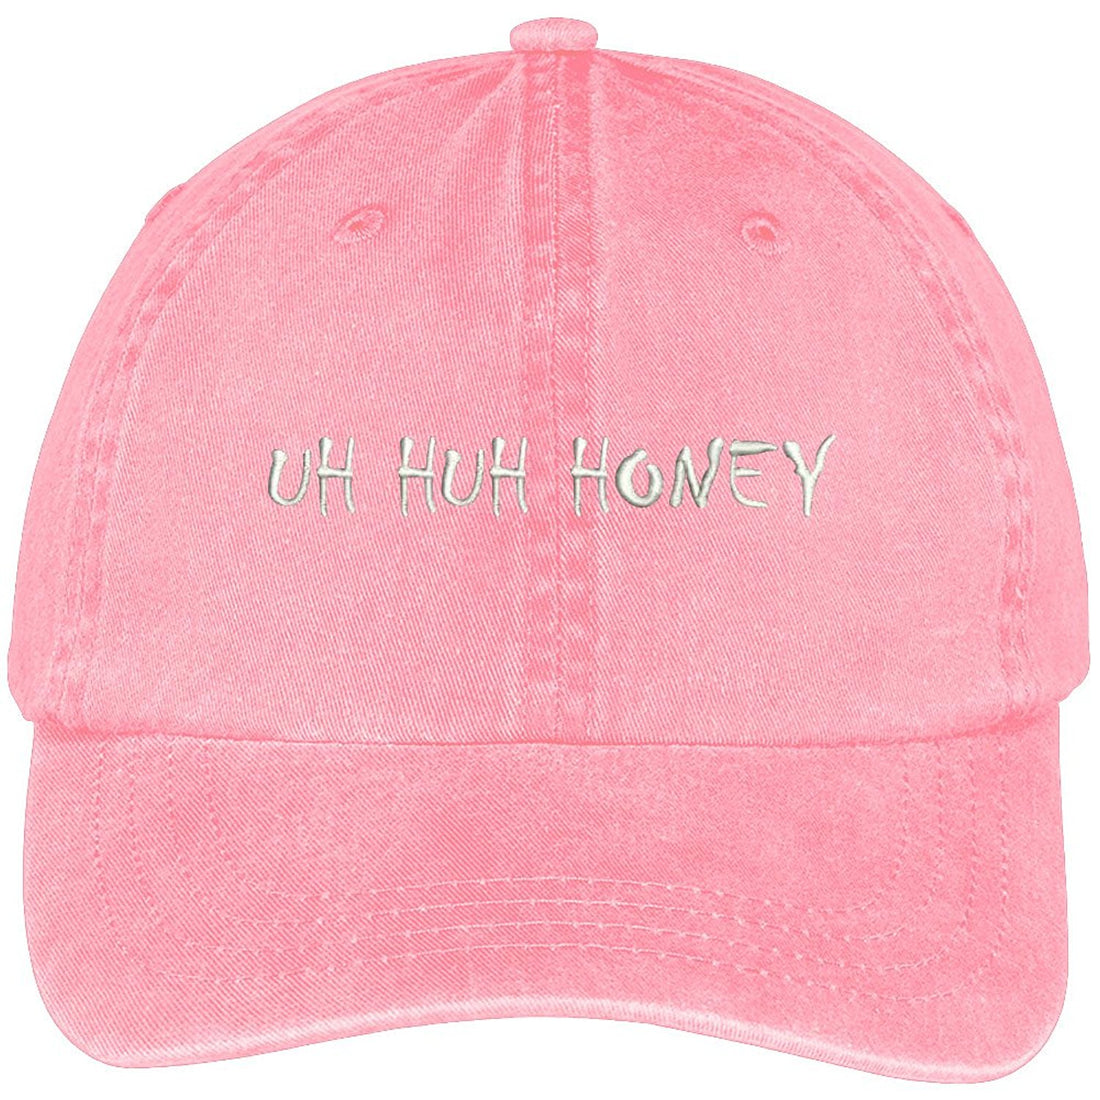 Trendy Apparel Shop Uh Huh Honey Embroidered Washed Cotton Adjustable Cap